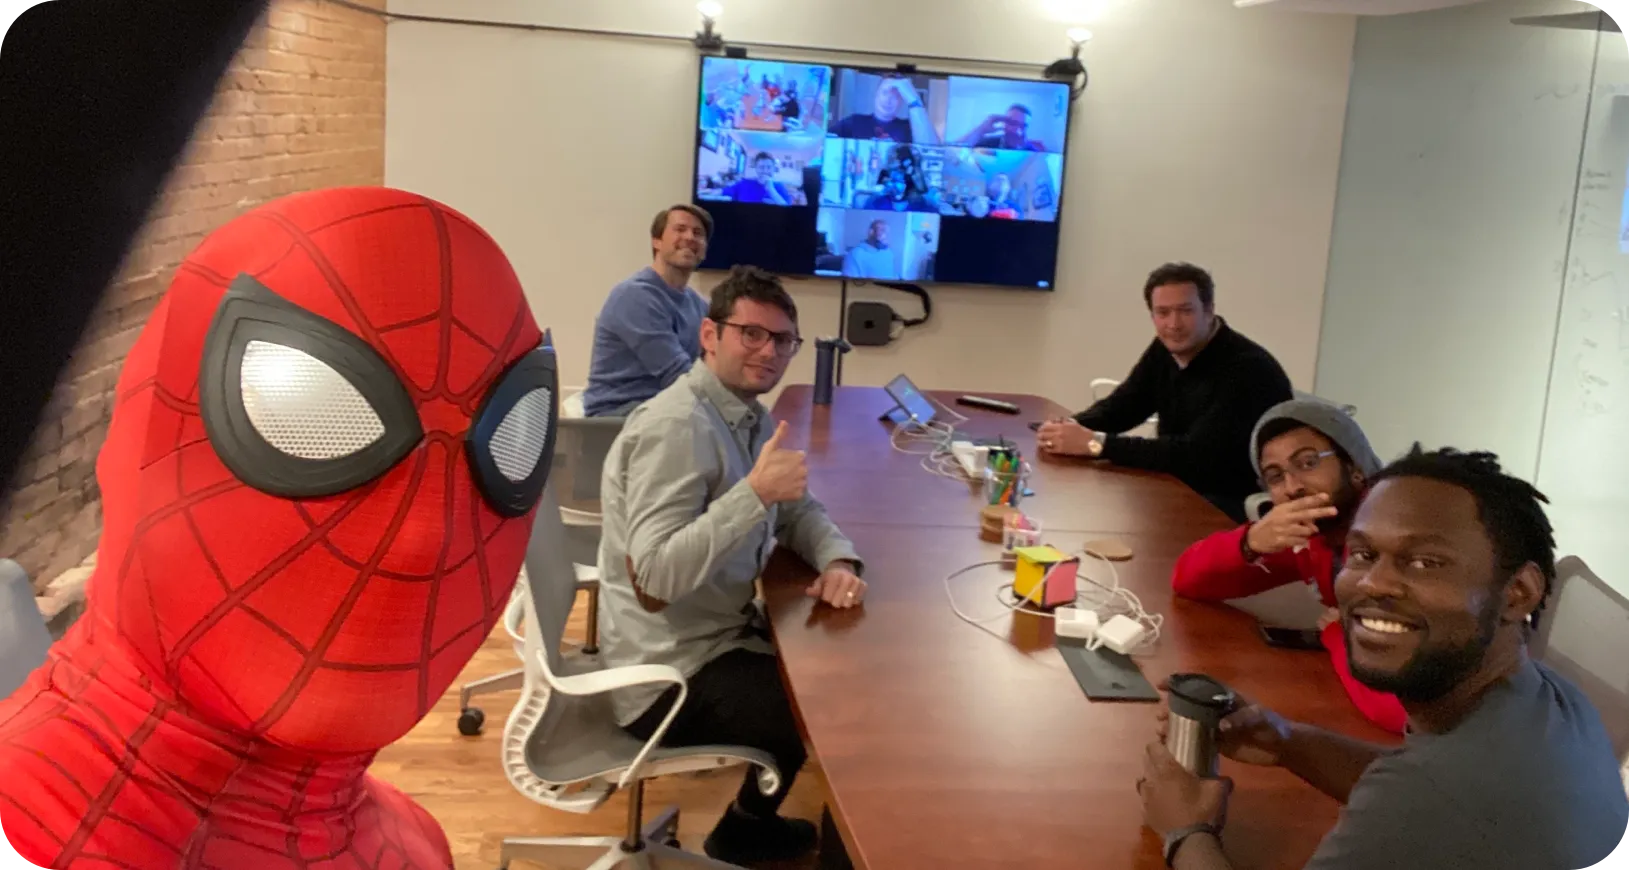 Vinli team in conference room with member dressed as Spiderman